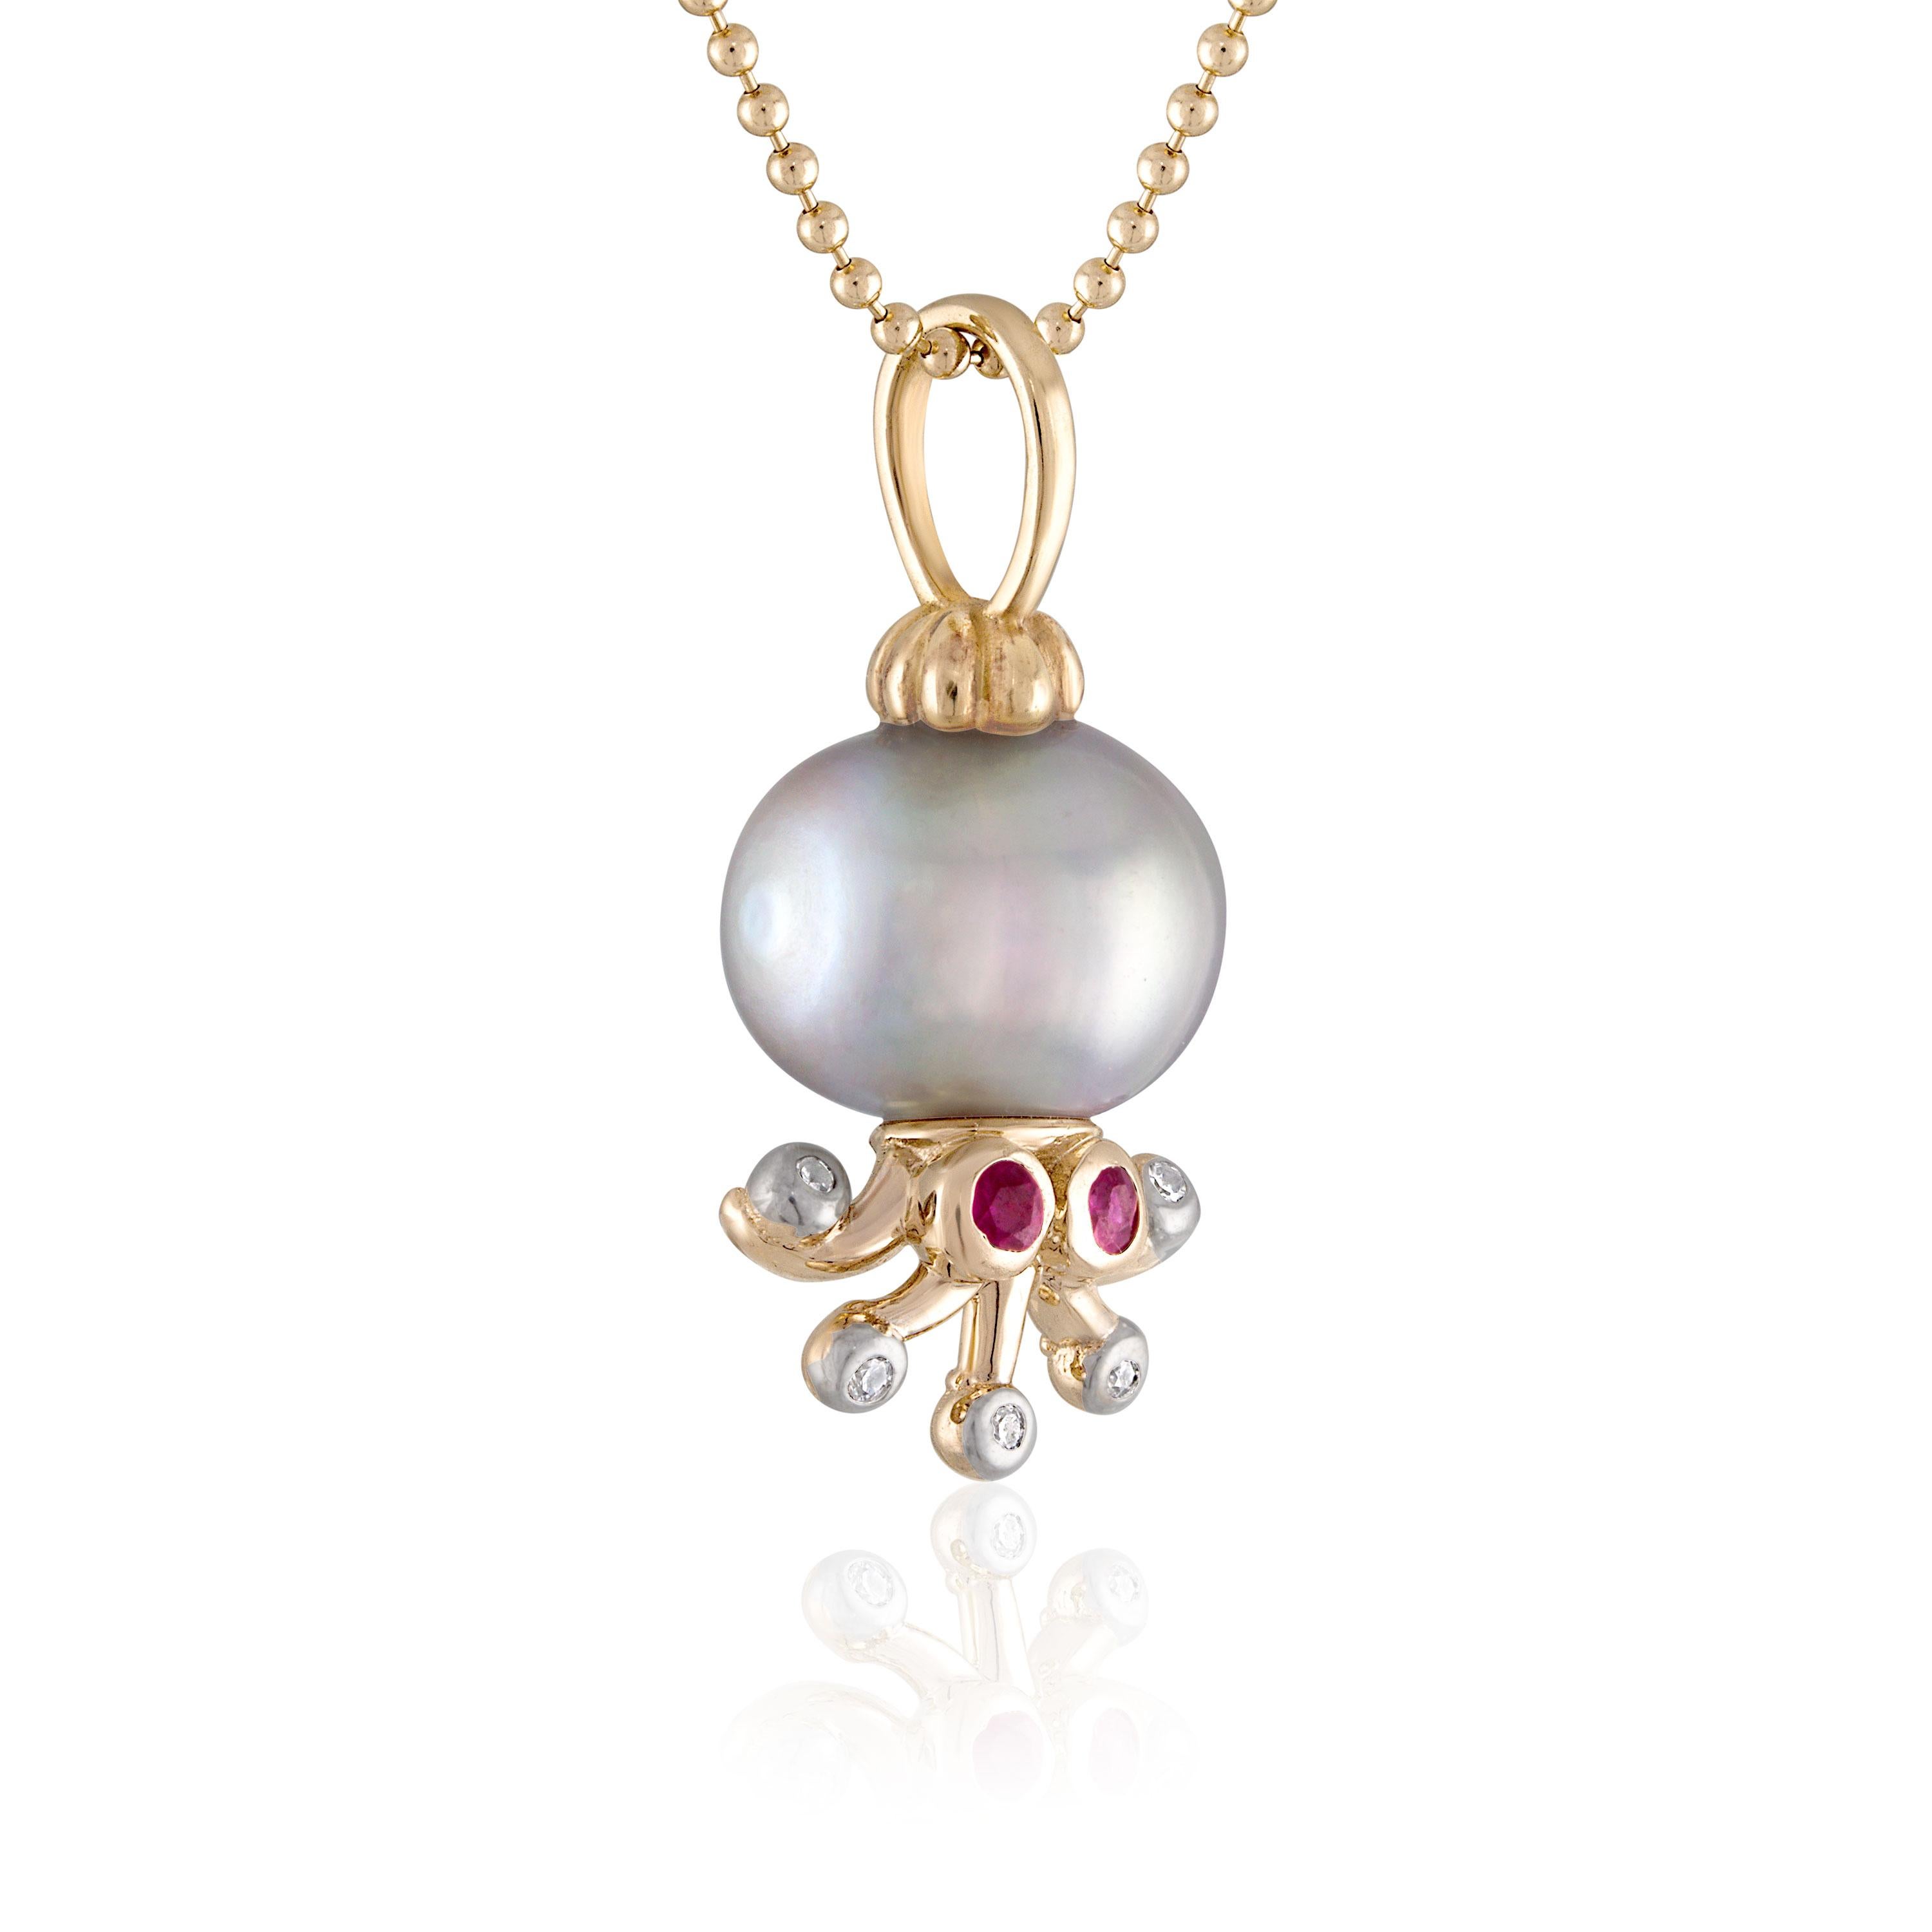 If you are looking for a unique and well-made pearl necklace that you can cherish for a long time, you might want to check out this octopus pearl necklace. It is crafted from 14k yellow gold and feature a lustrous freshwater pearl with ruby eyes and